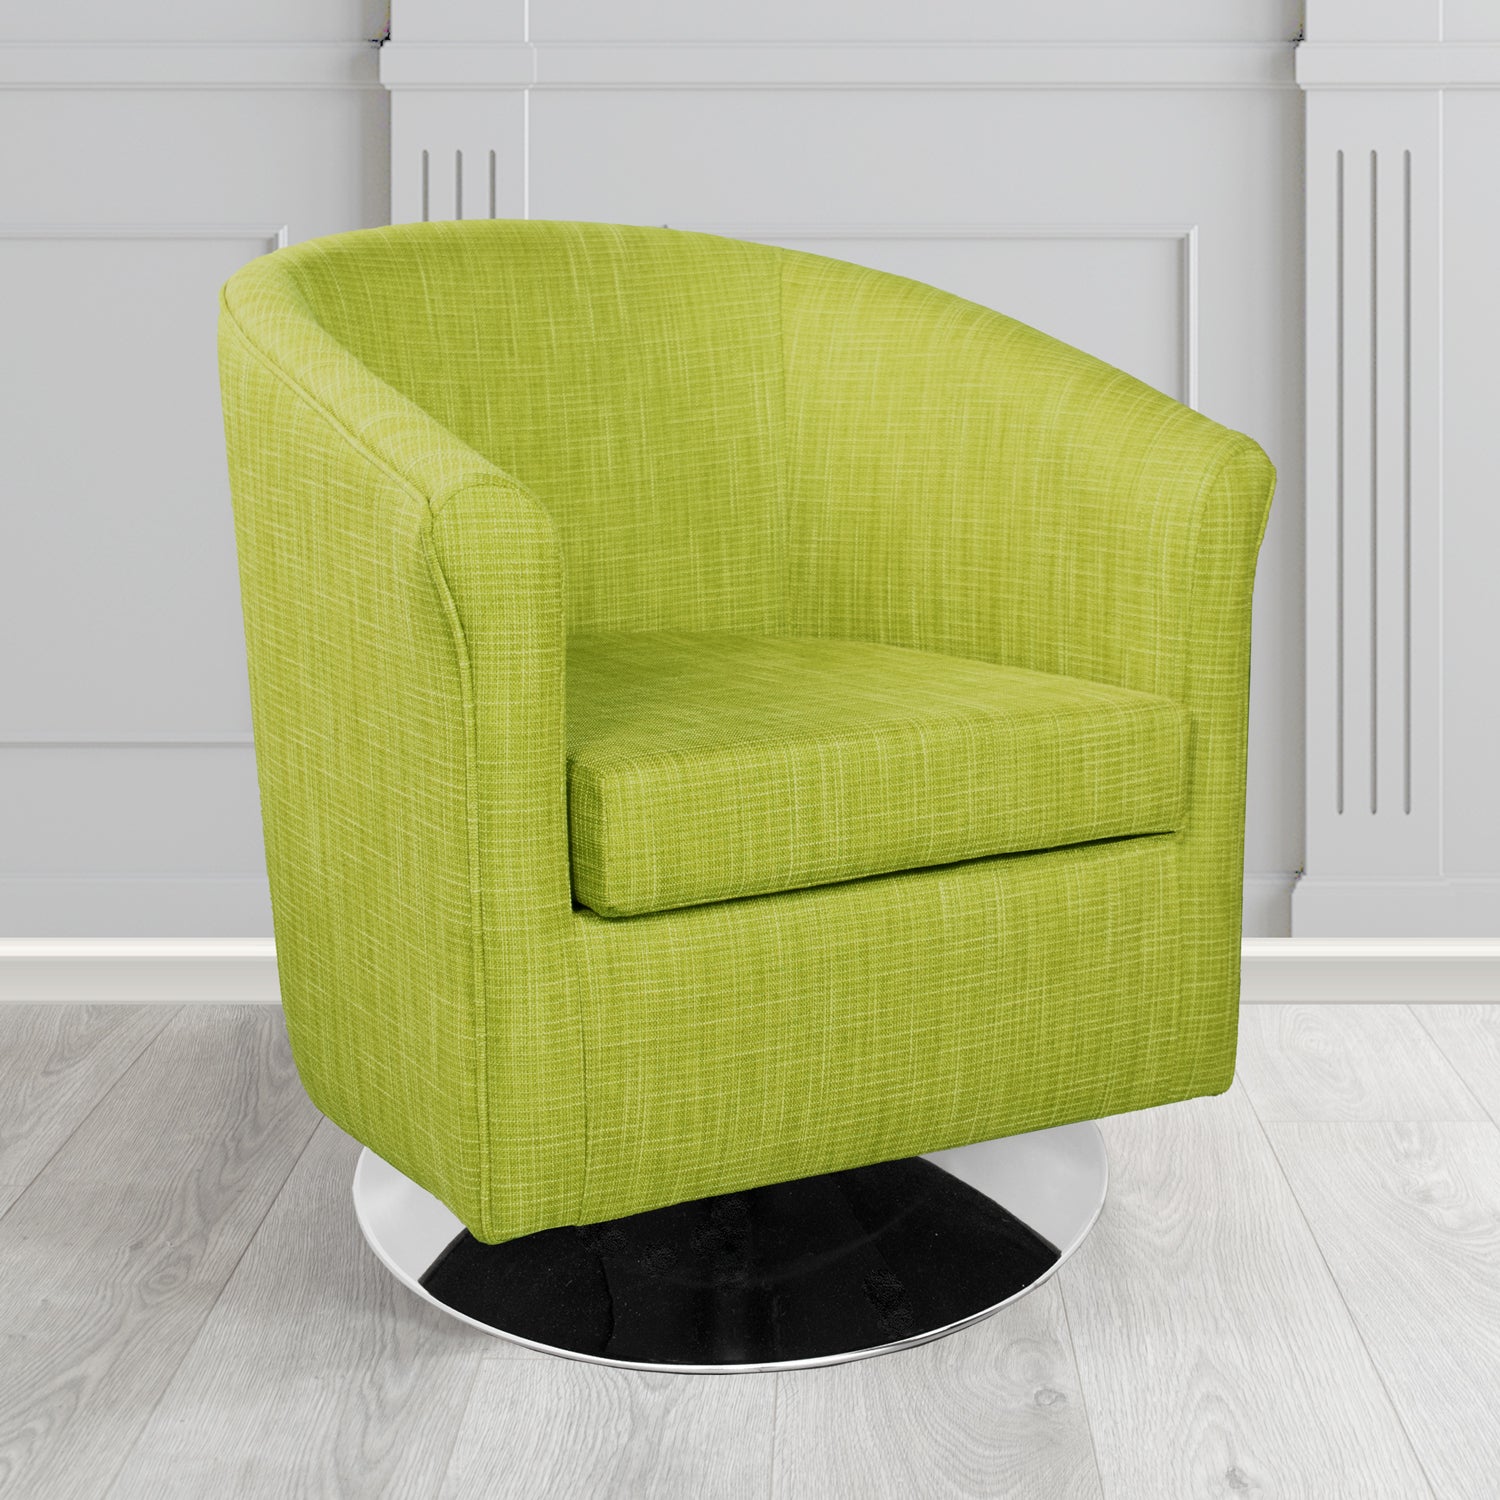 Tuscany Ravel Umami Contract Crib 5 Fabric Swivel Tub Chair - Antimicrobial & Water-Resistant - The Tub Chair Shop